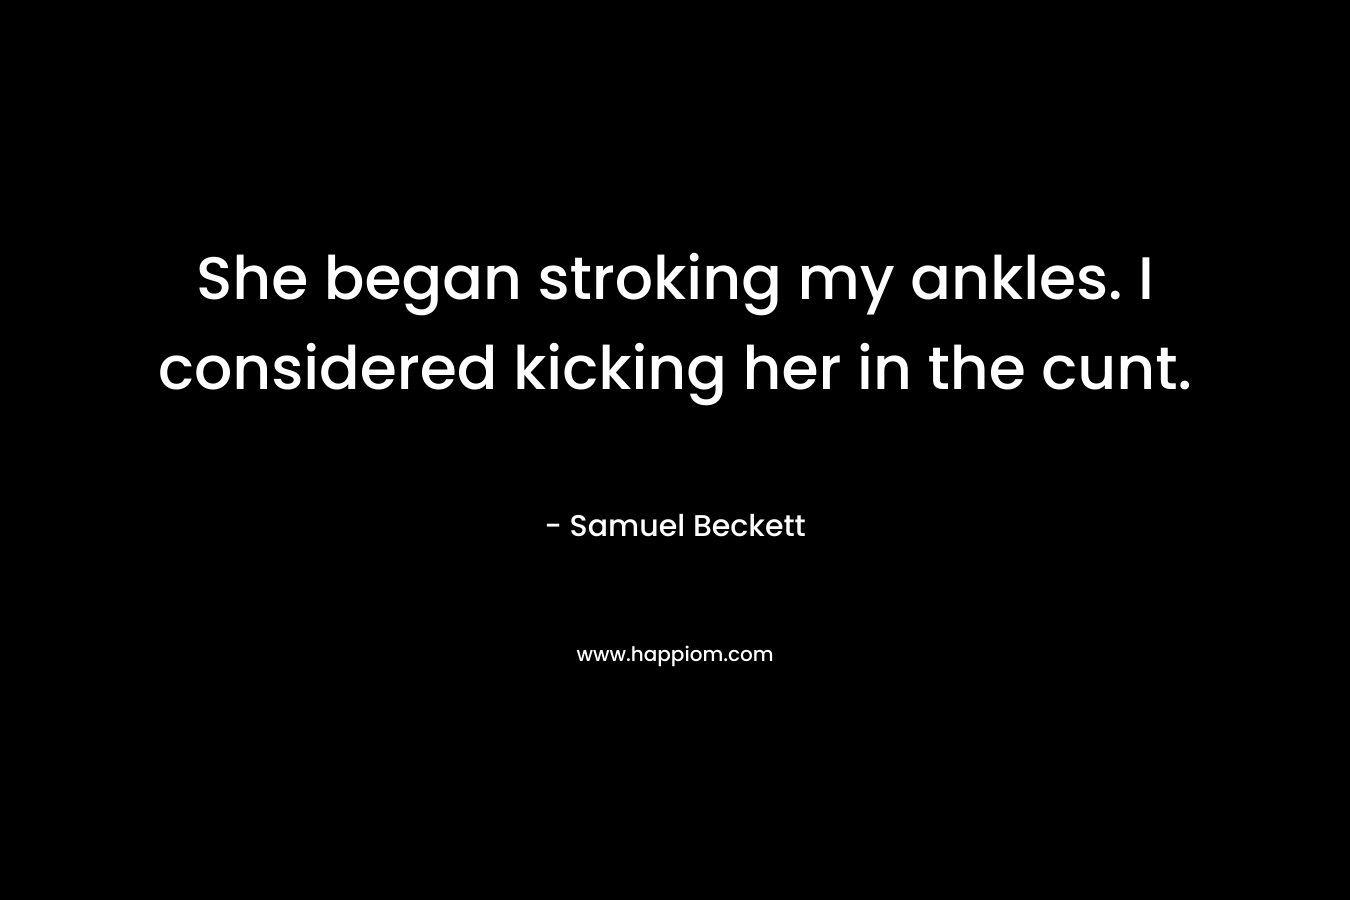 She began stroking my ankles. I considered kicking her in the cunt. – Samuel Beckett